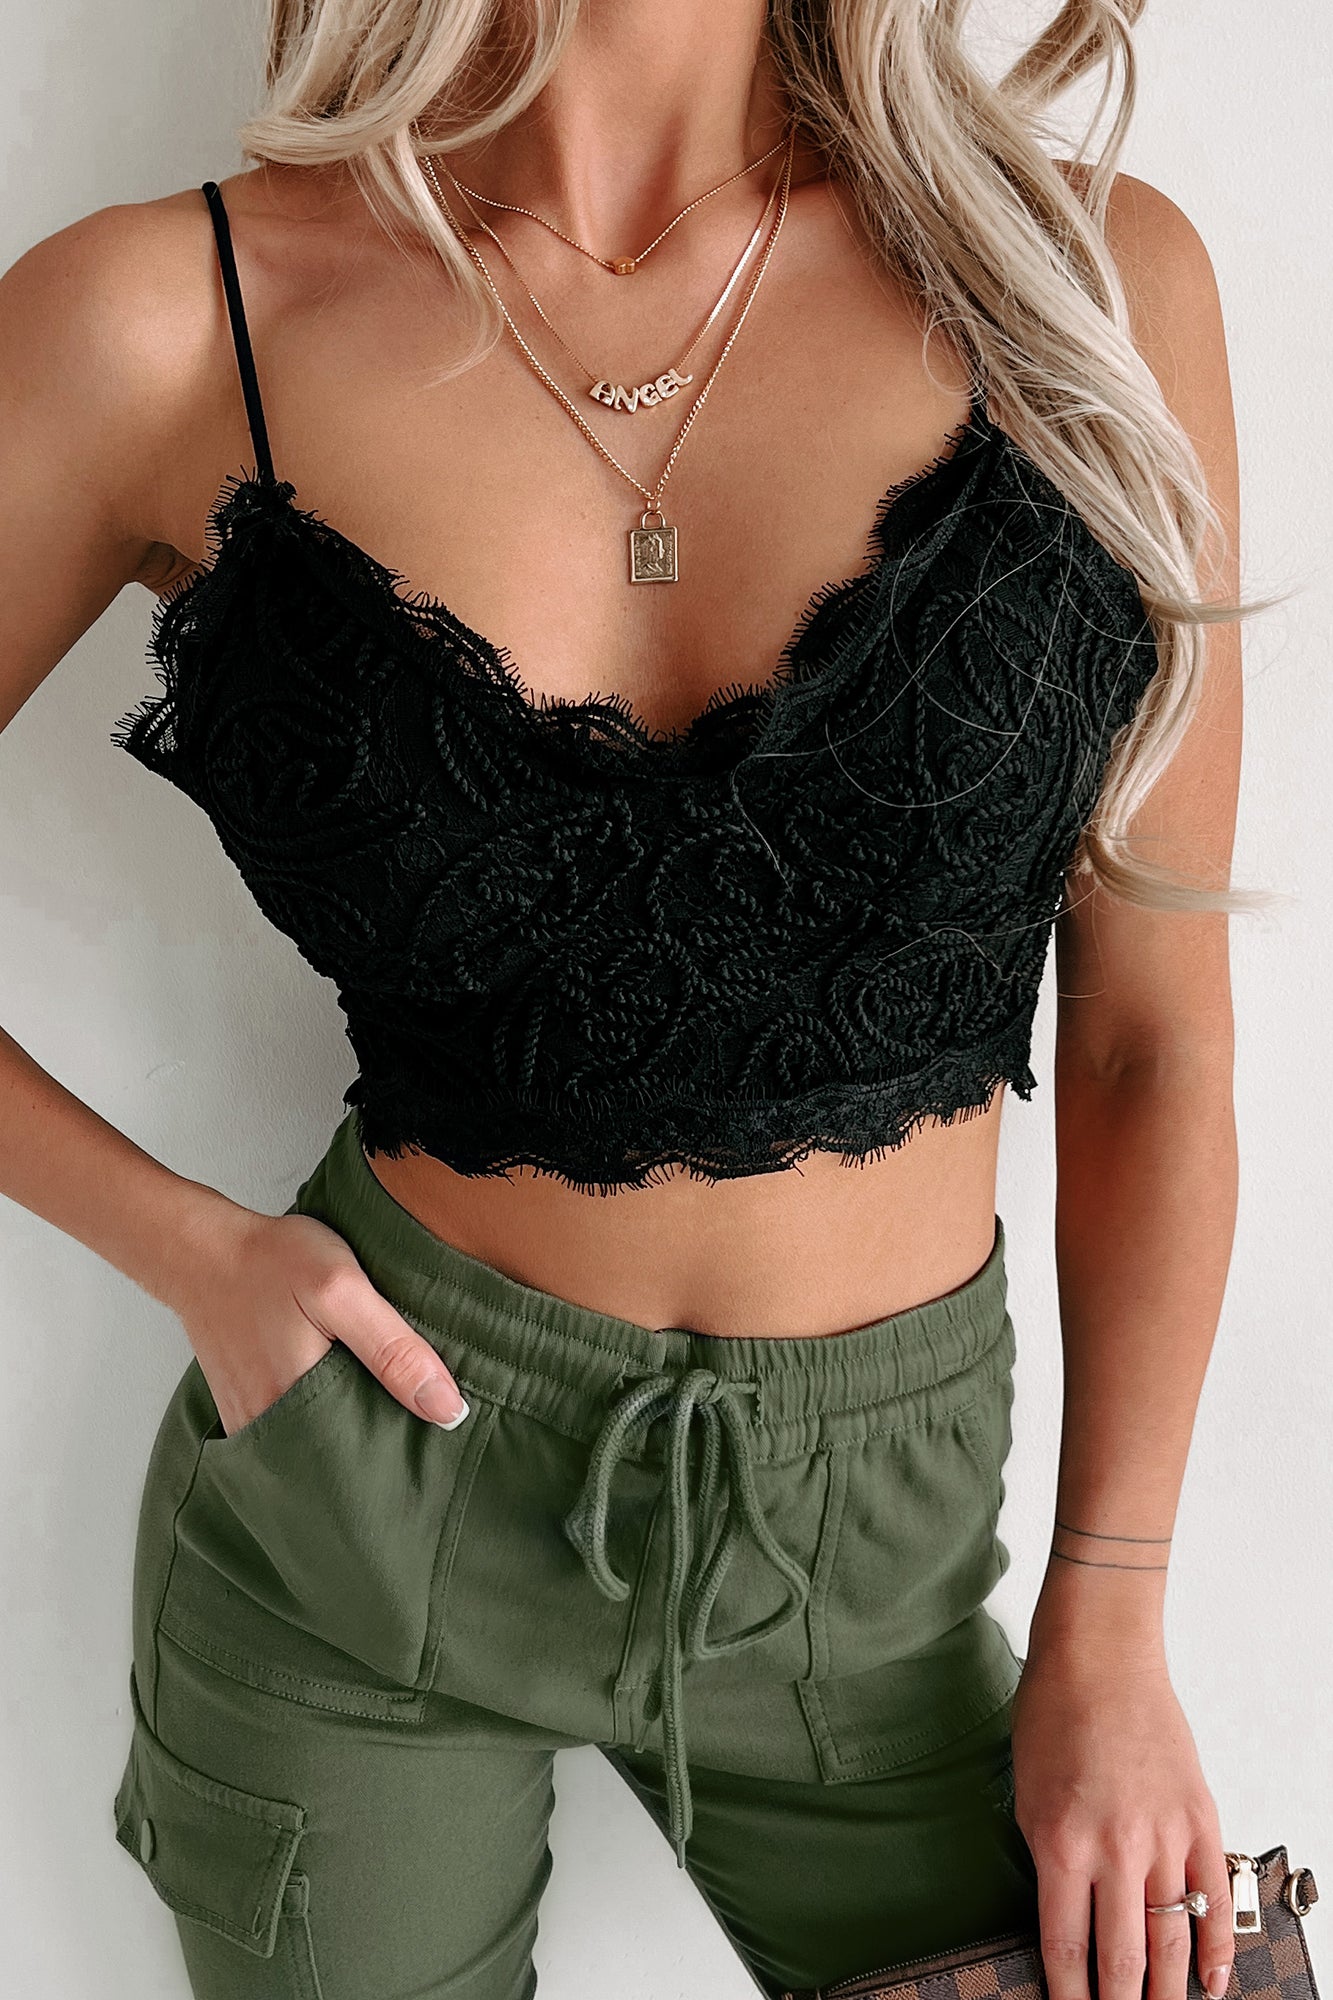 Lace Bralette Outfit